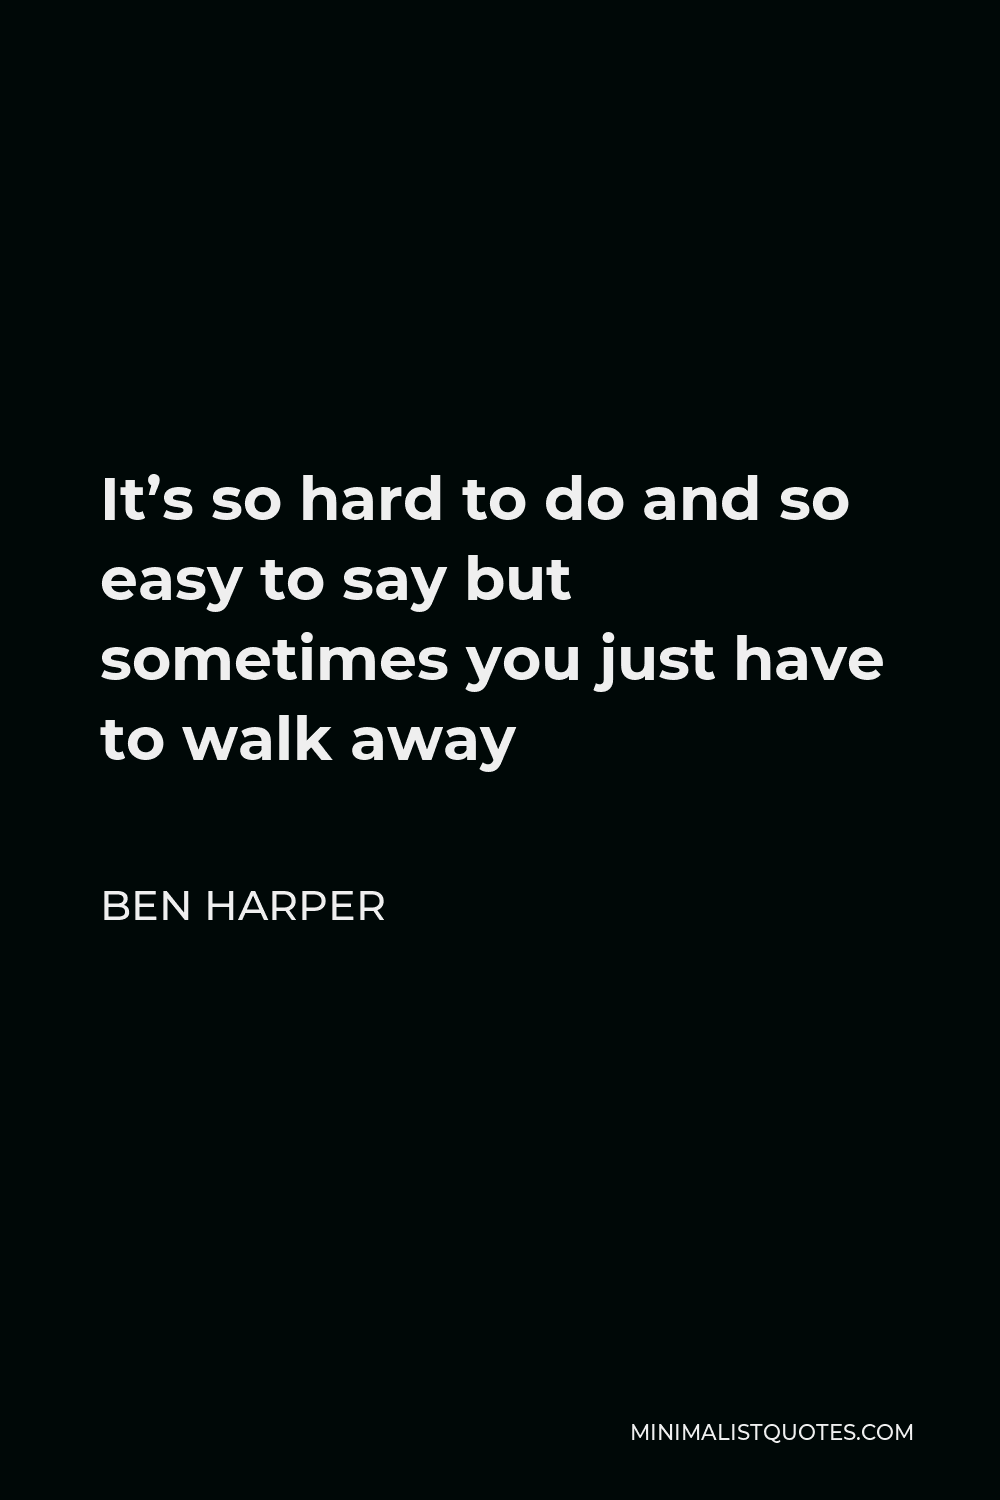 Ben Harper Quote - It’s so hard to do and so easy to say but sometimes you just have to walk away